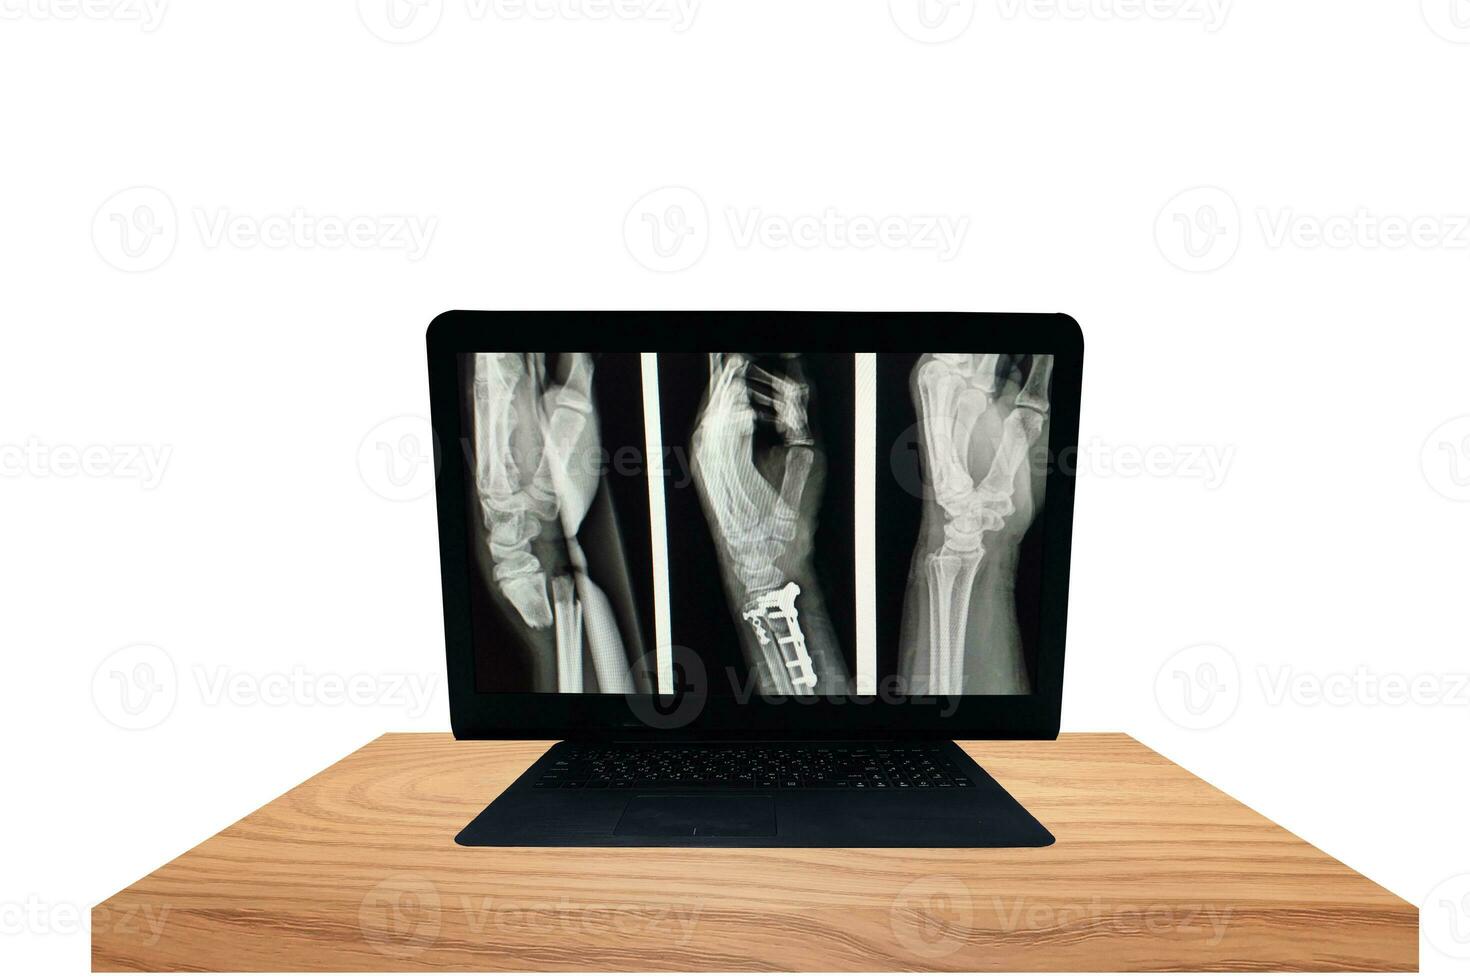 X-ray Left wrist fracture distal metaphysis of both bones forearm.Dorsol displacement of distal fragments.Severe swelling of soft tissue.Medical image concept. photo